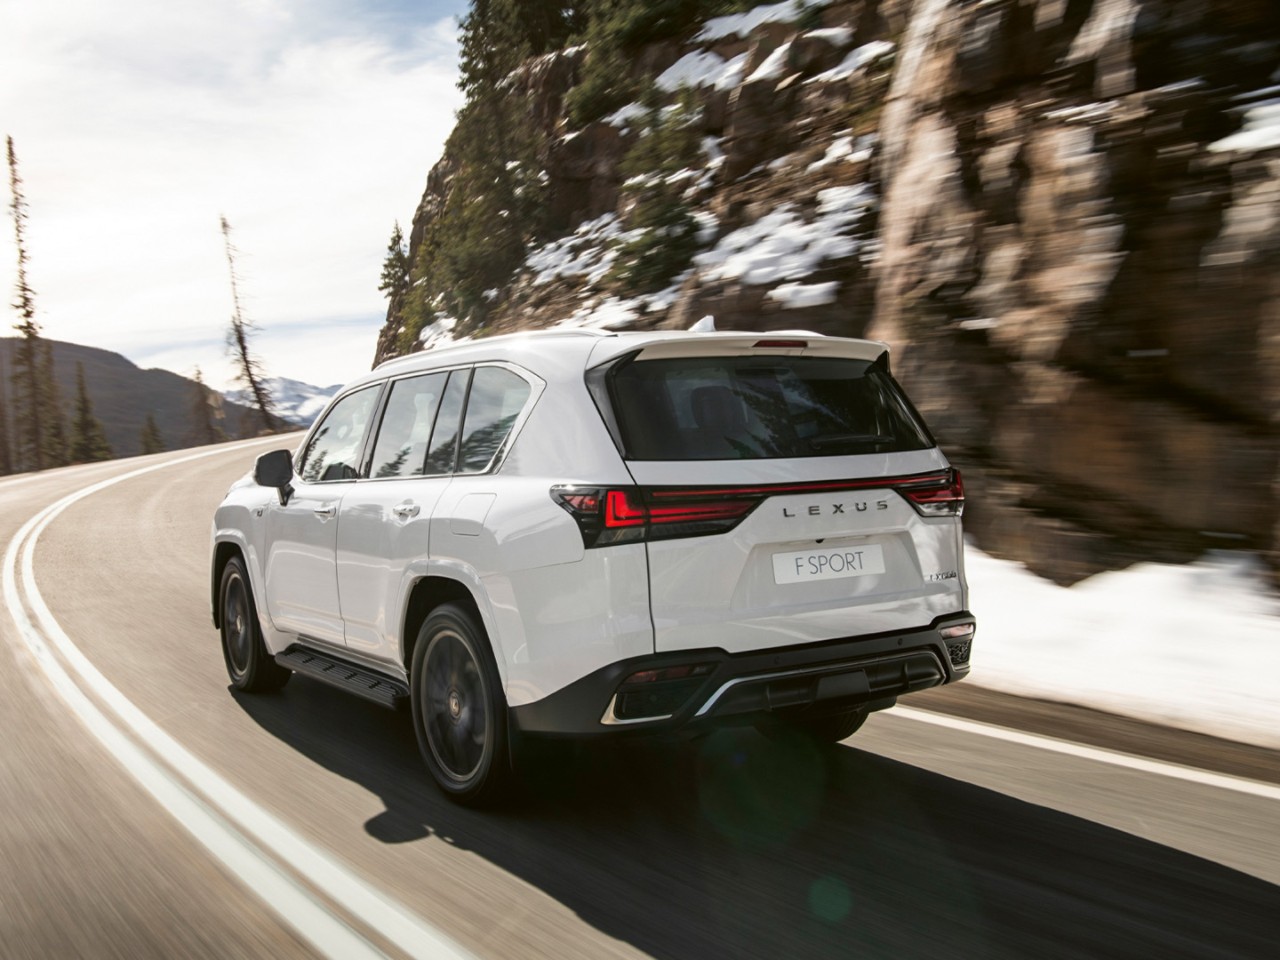 A white Lexus LX driving on a mountain road